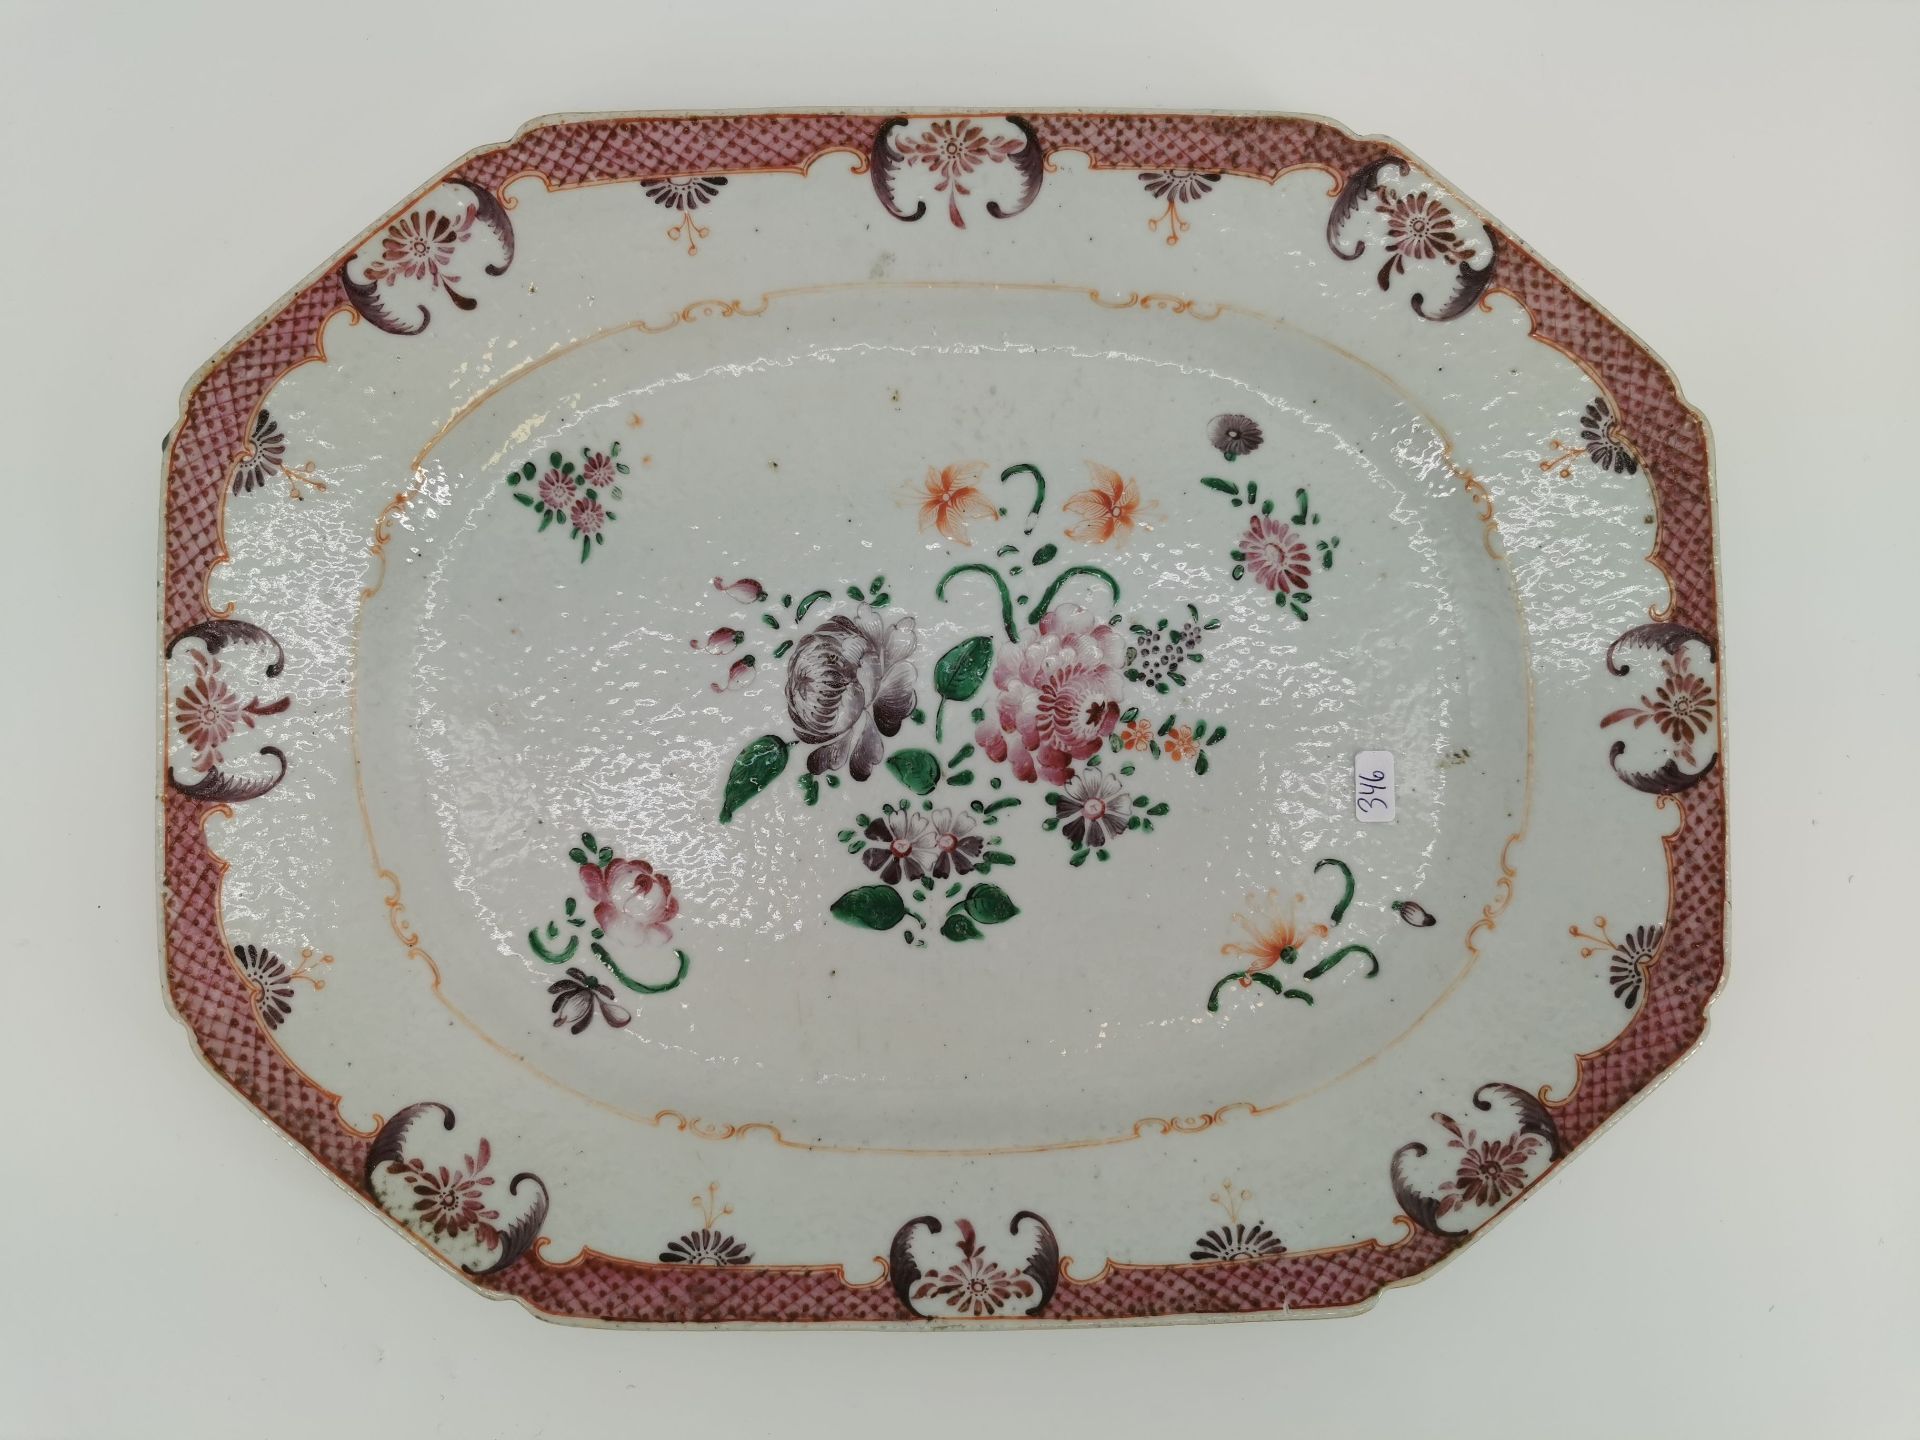 PLATE OF THE 18TH CENTURY 